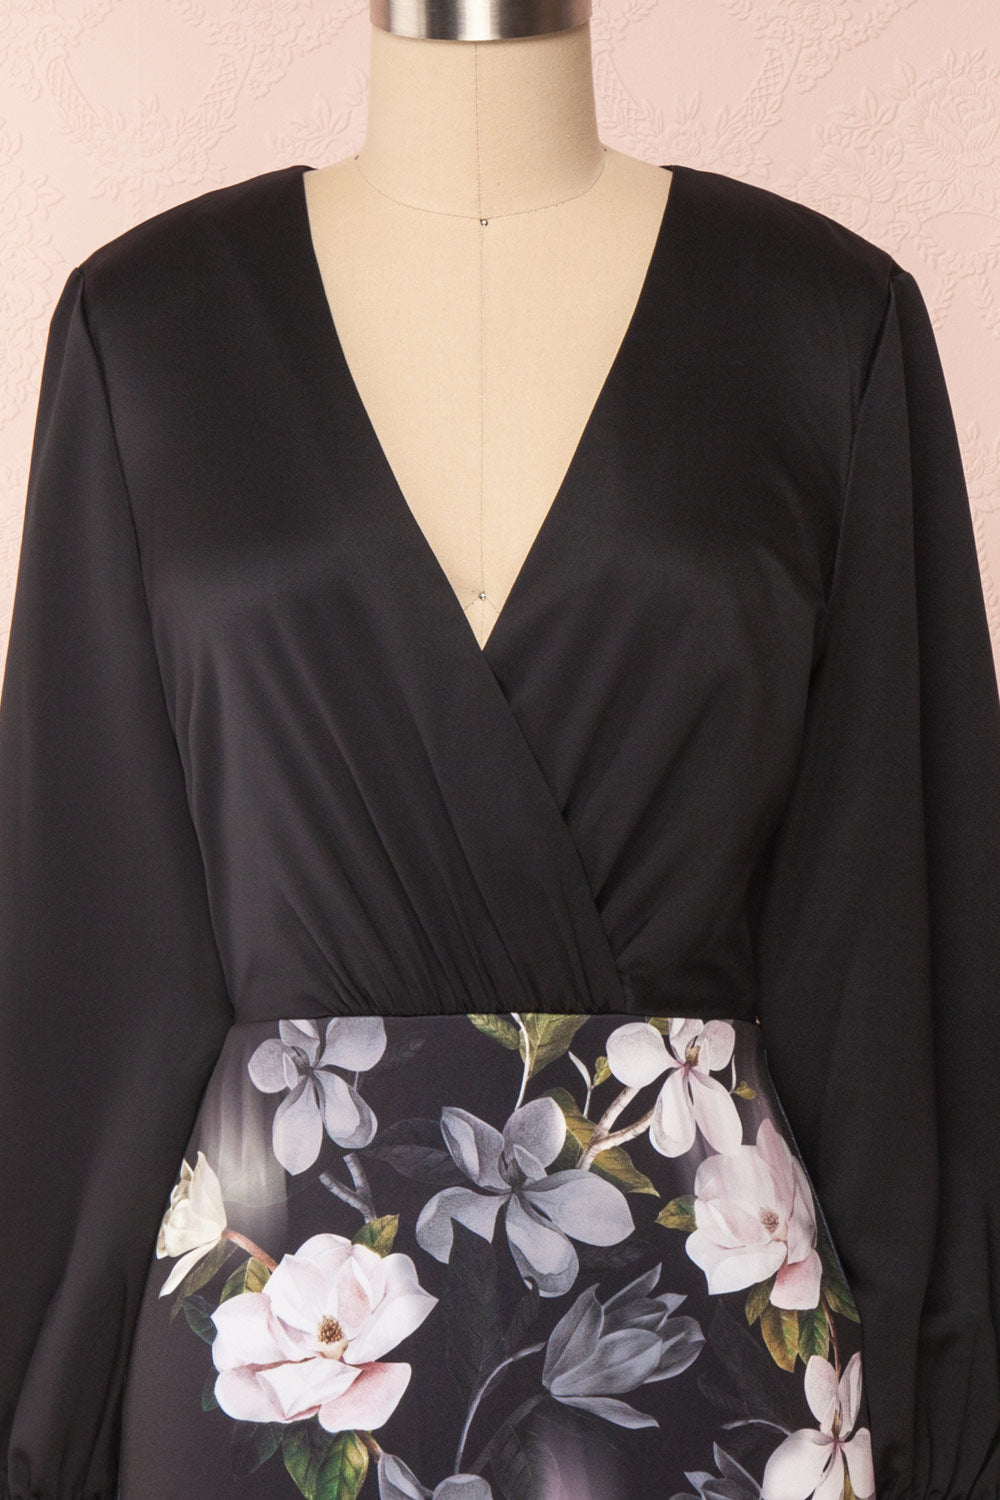 Alexina Black Floral Fitted Ted Baker Cocktail Dress | Boutique 1861 front close-up